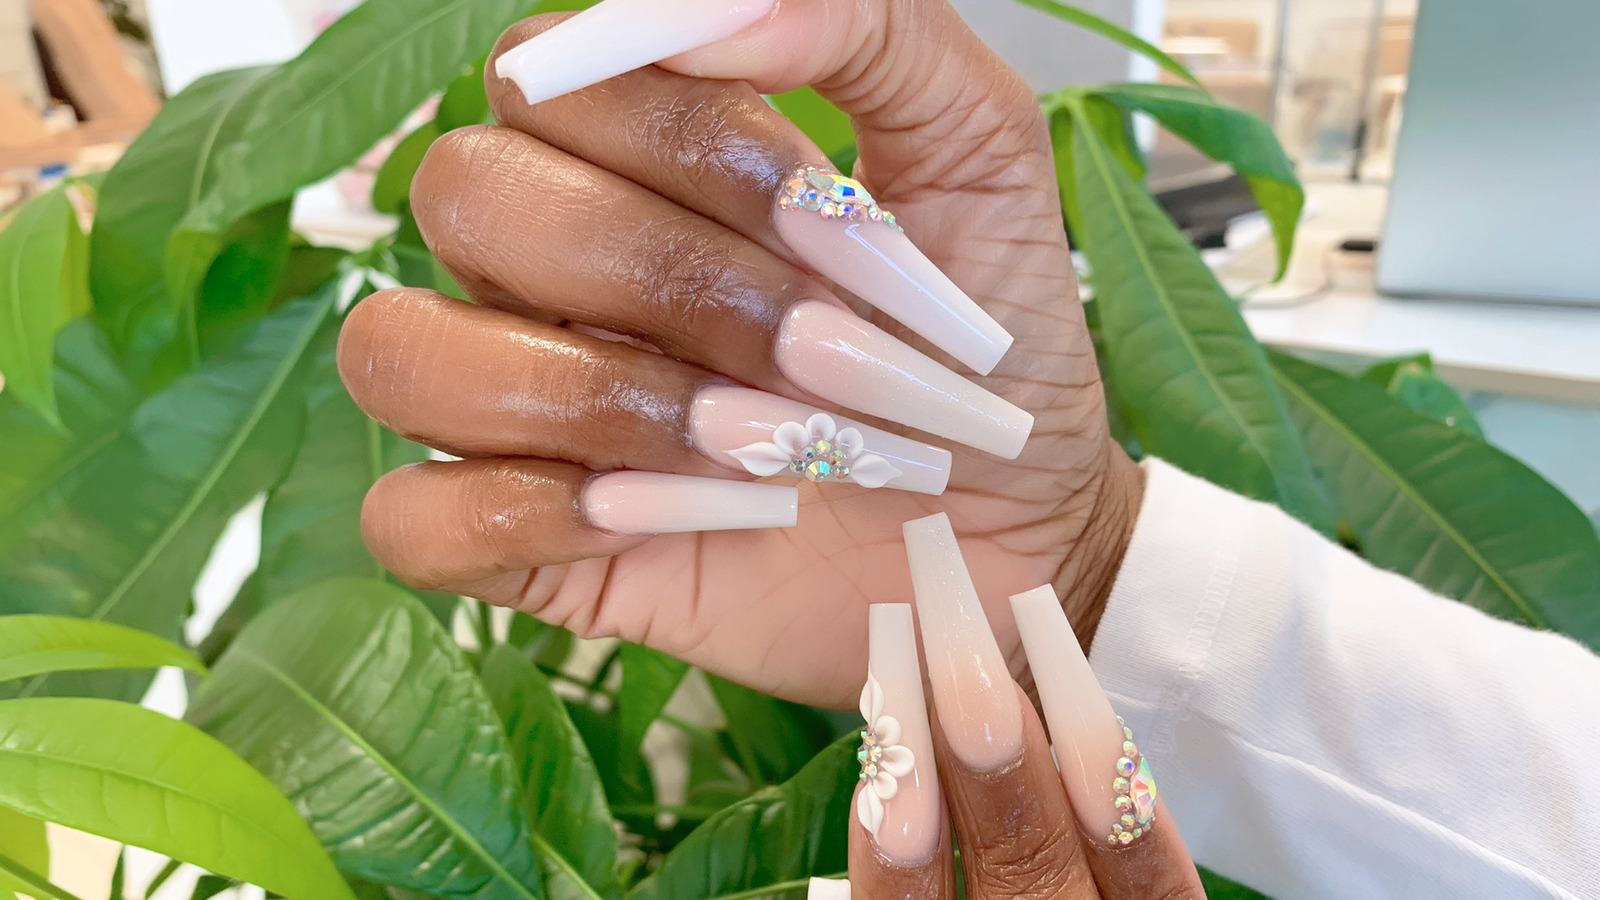 32 Accent Nails That Will Inspire Your Next Mix-And-Match Mani